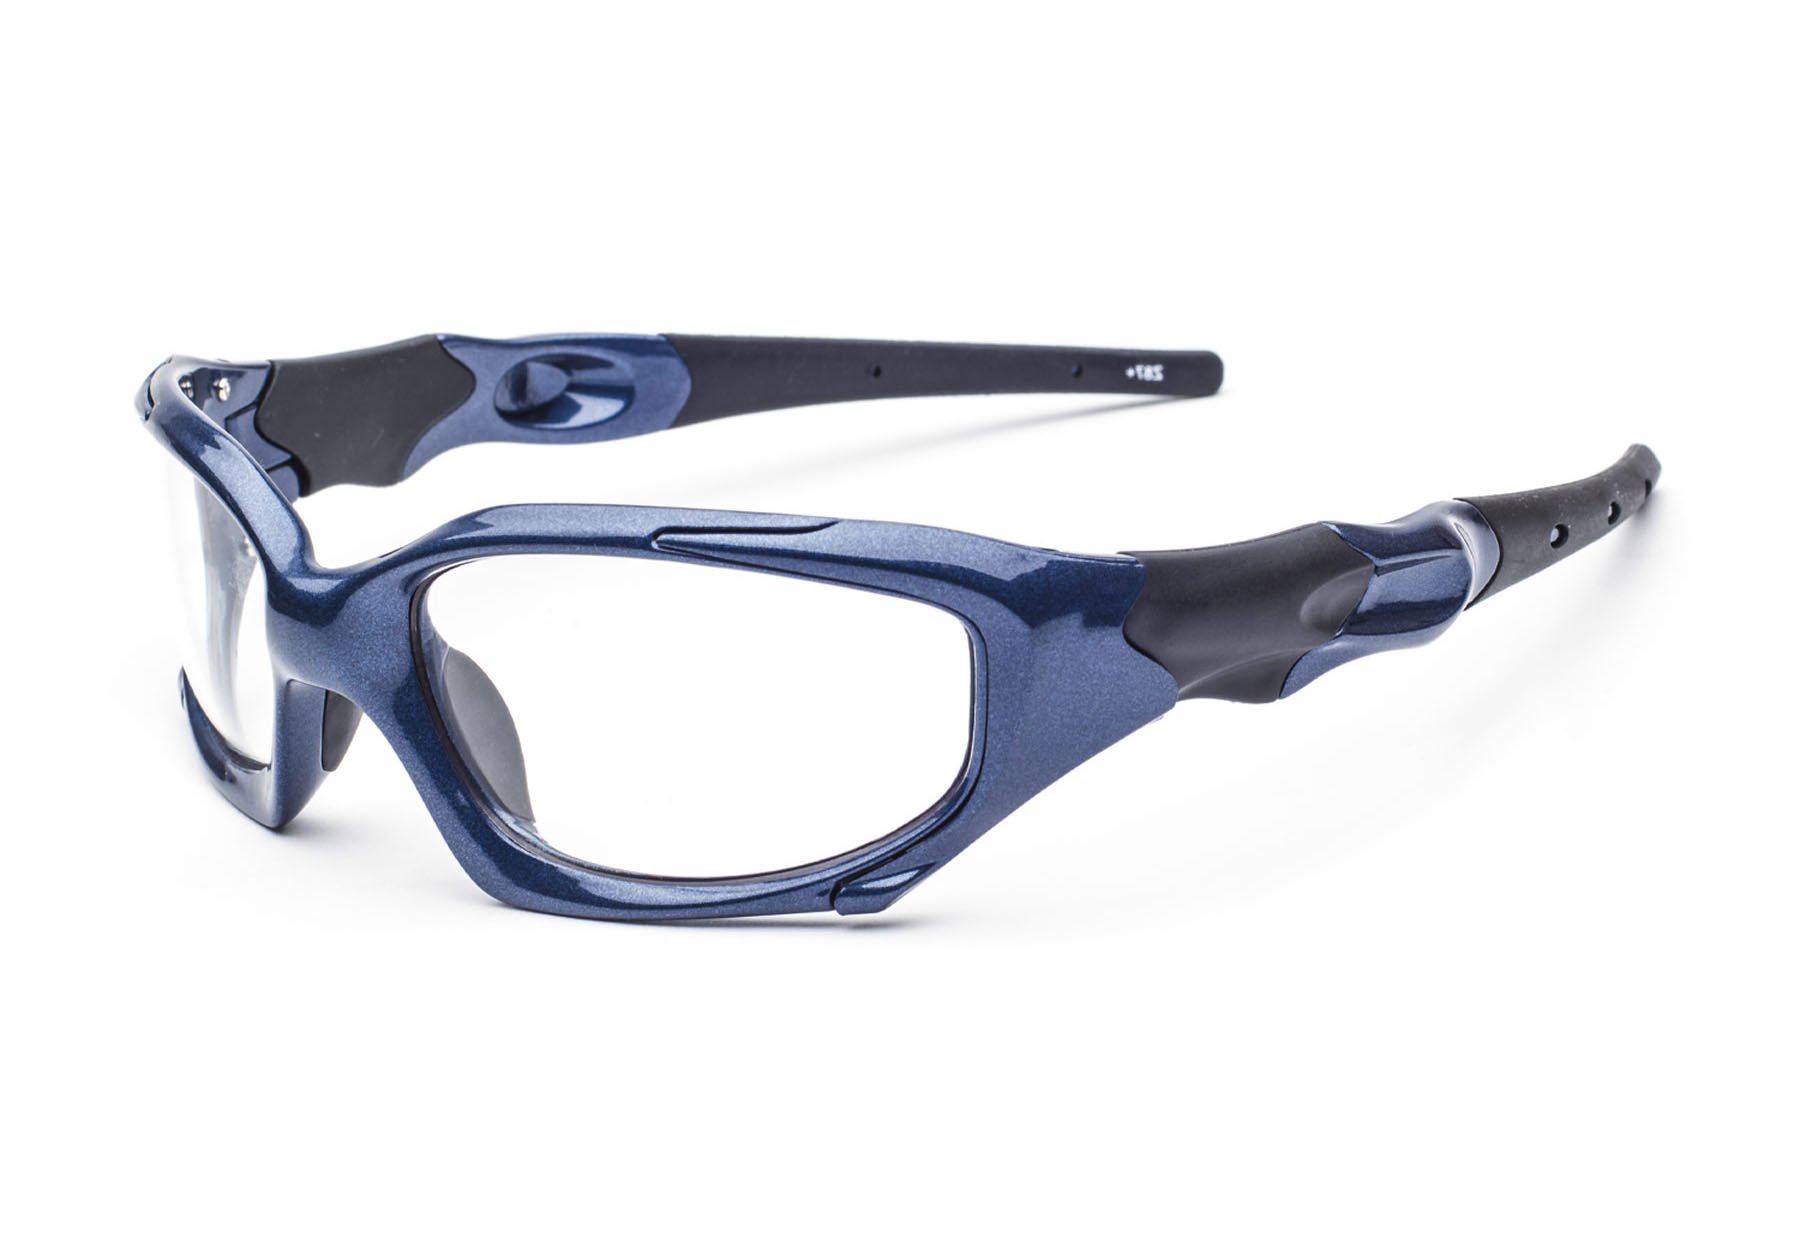 Wiley-X Contour 0.75mm Lead Glass Radiation safety glasses, USA-Made by  Protech Medical – AcuGuard Corporation